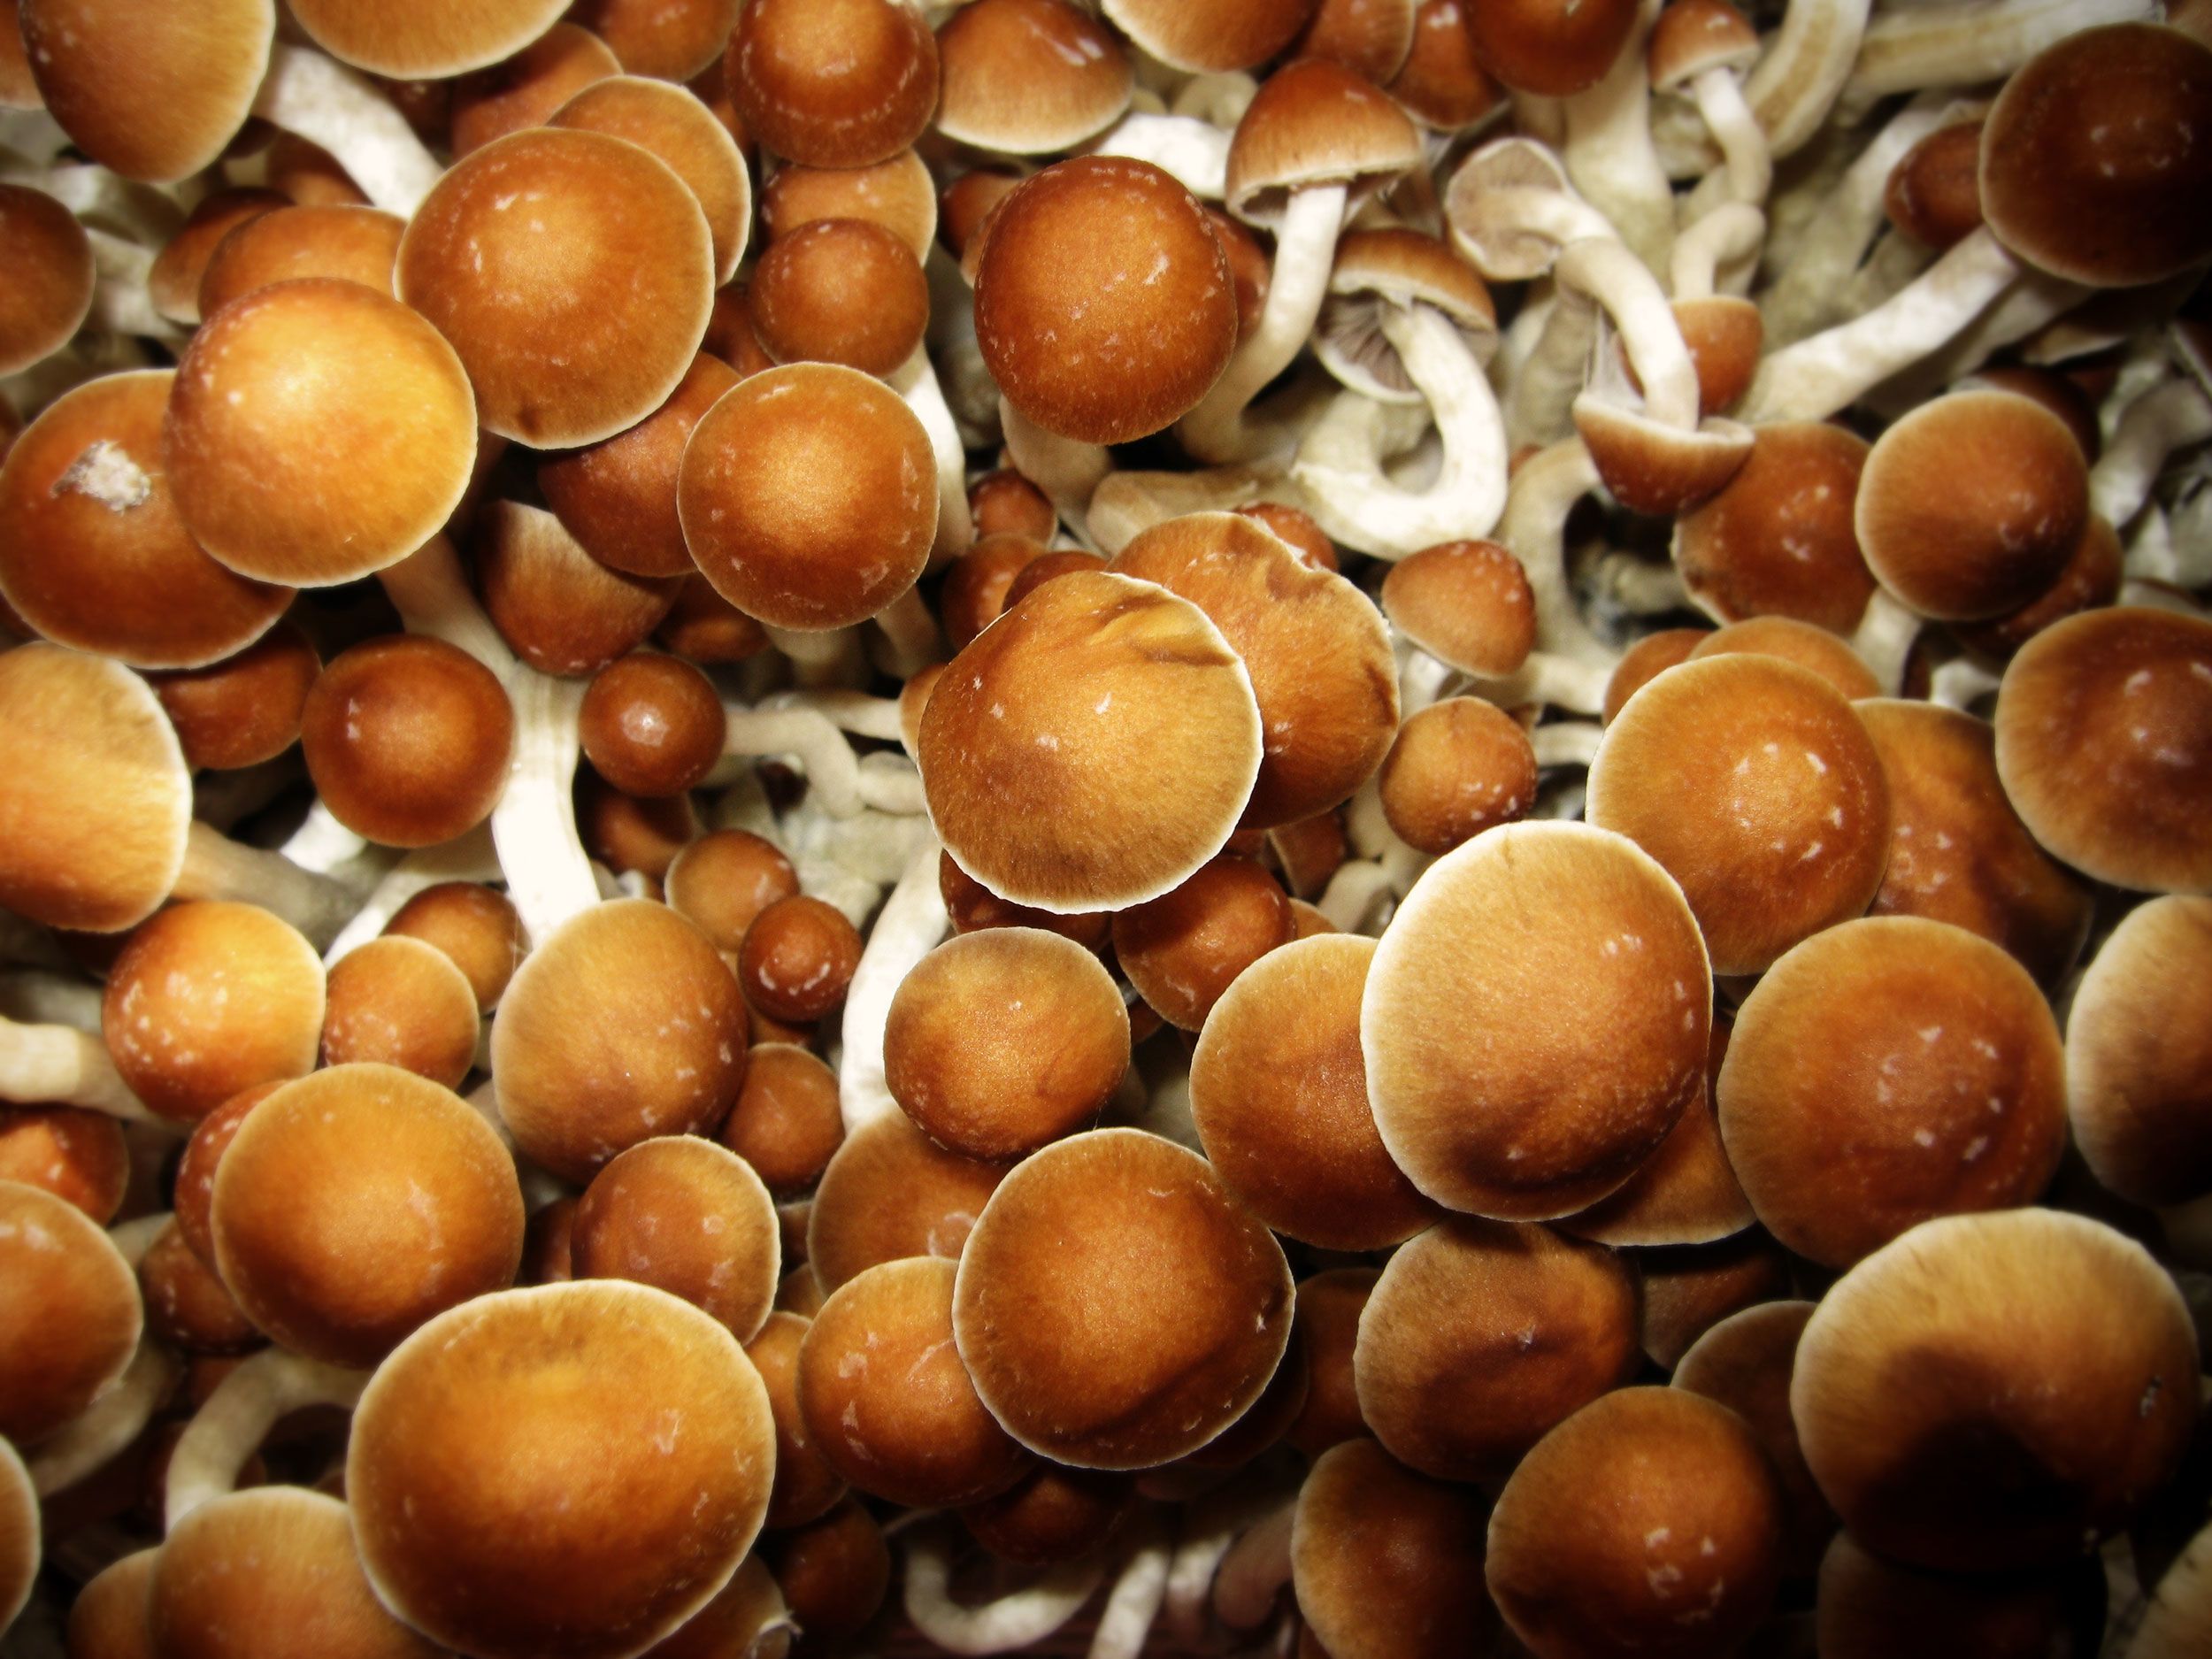 Psychedelic mushroom benefits are popping up all over | CNN